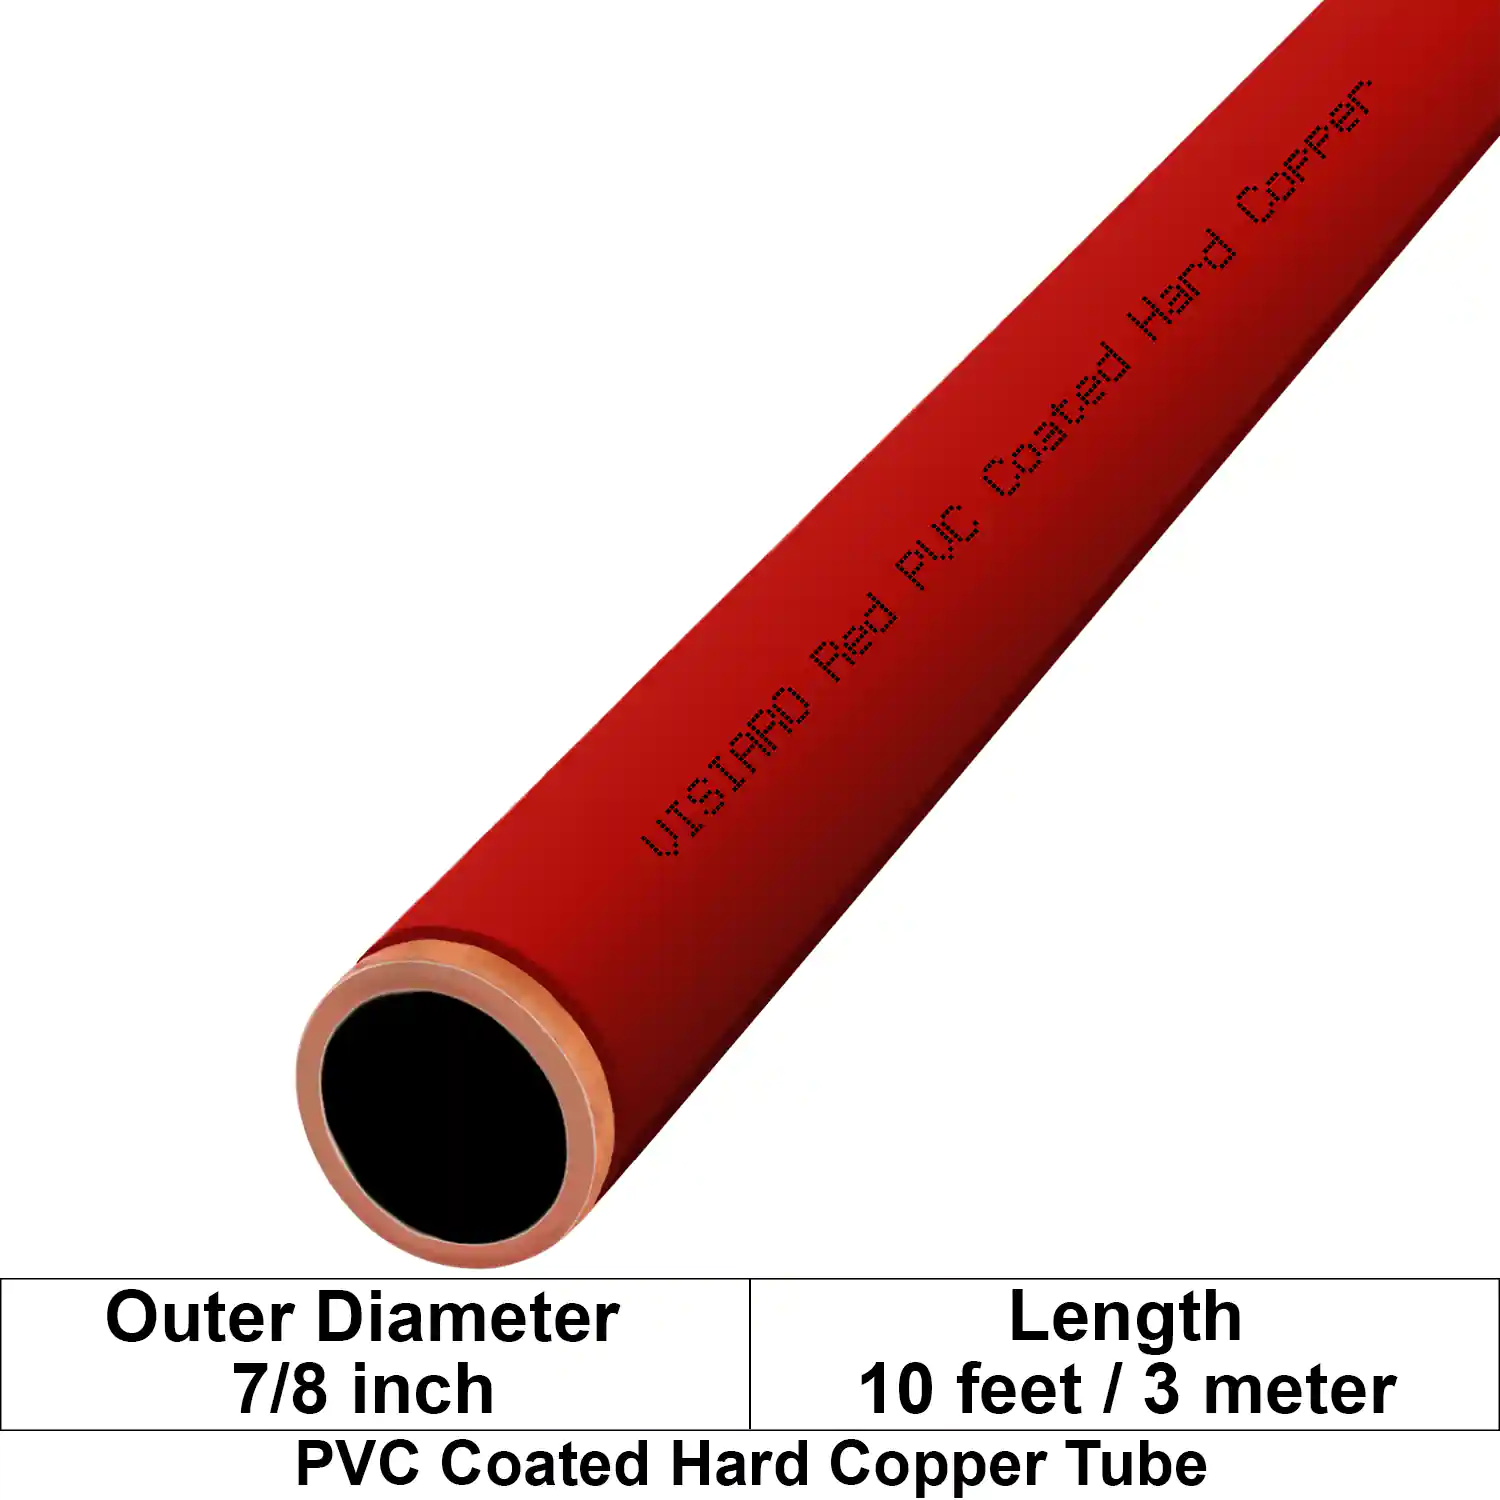 Visiaro Red PVC Coated Hard Copper Tube 10ft long Outer Diameter - 7/8 inch